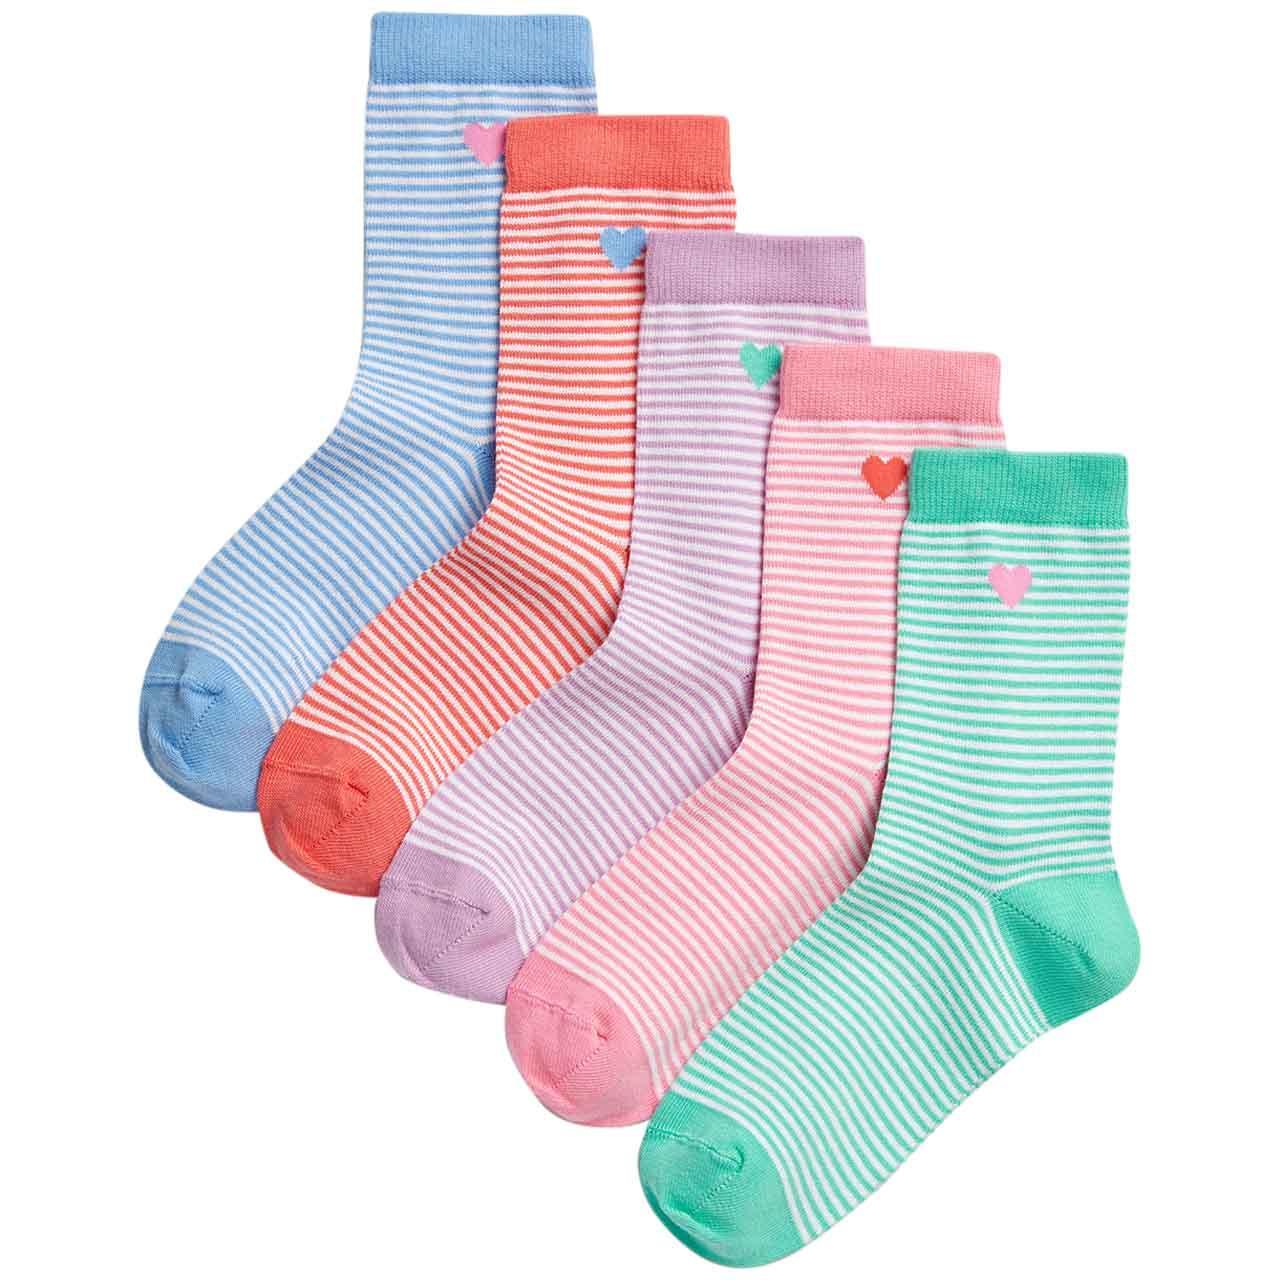 M&S Girls Cotton Rich Striped Socks, 8.5-12 Small, 5 Pack